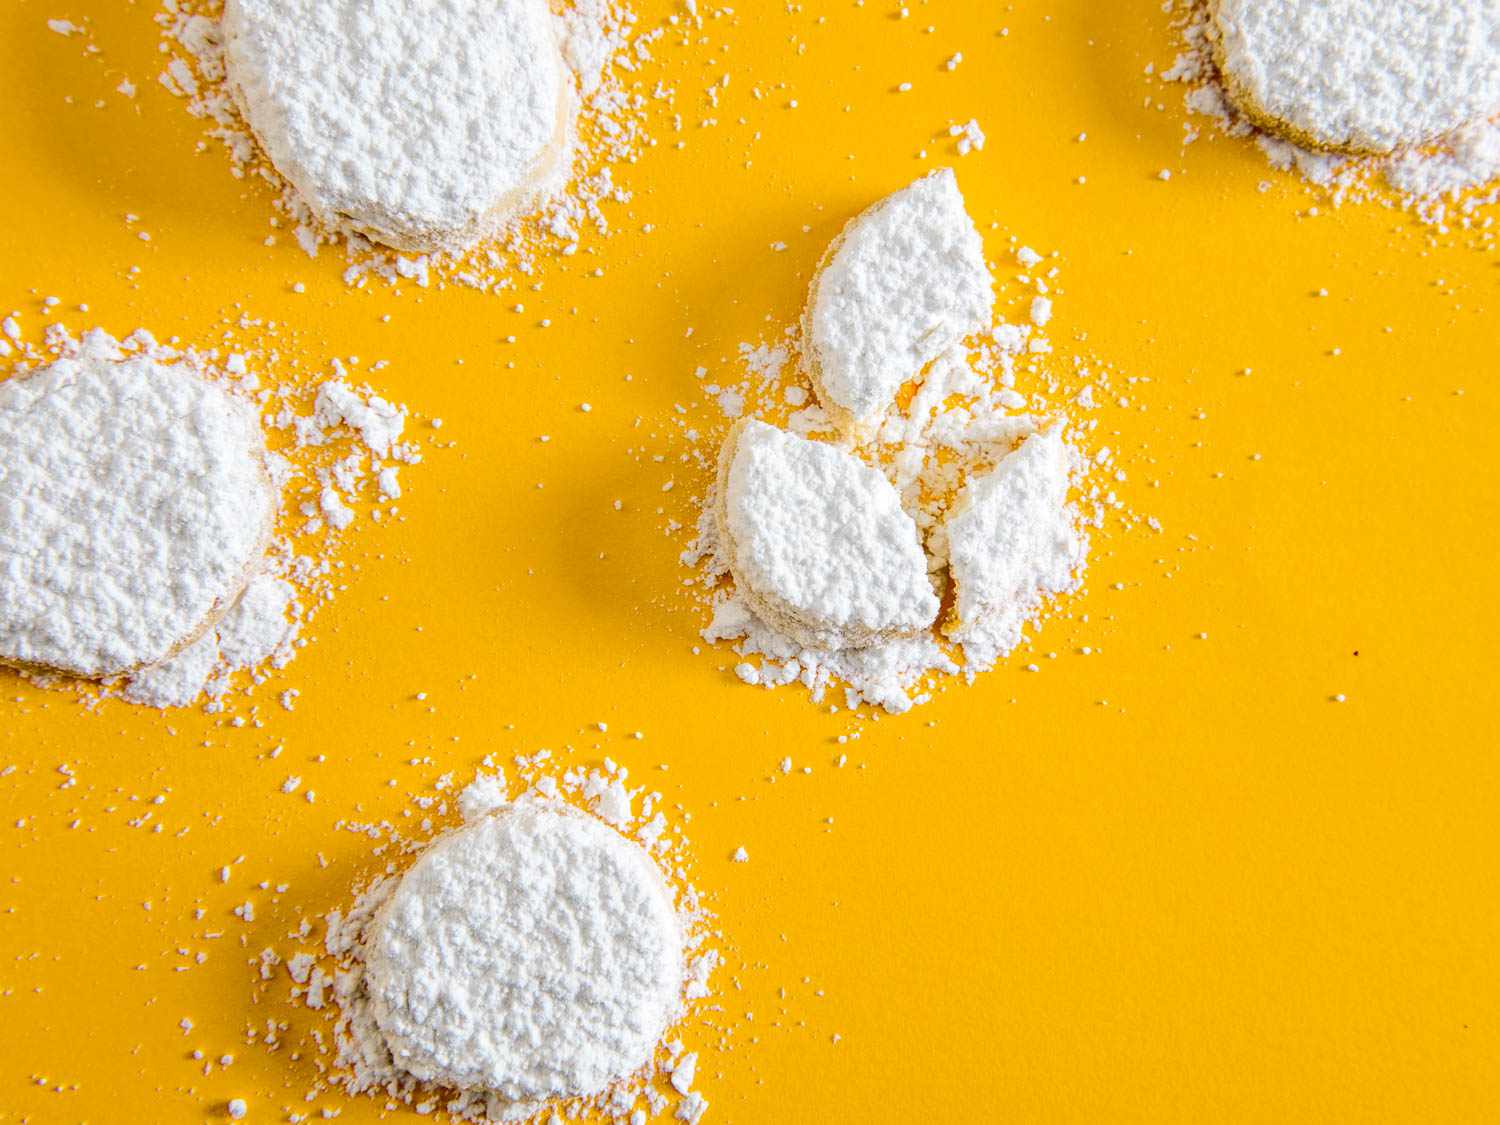 Powdered sugar-covered lemon meltaway cookies against a yellow background